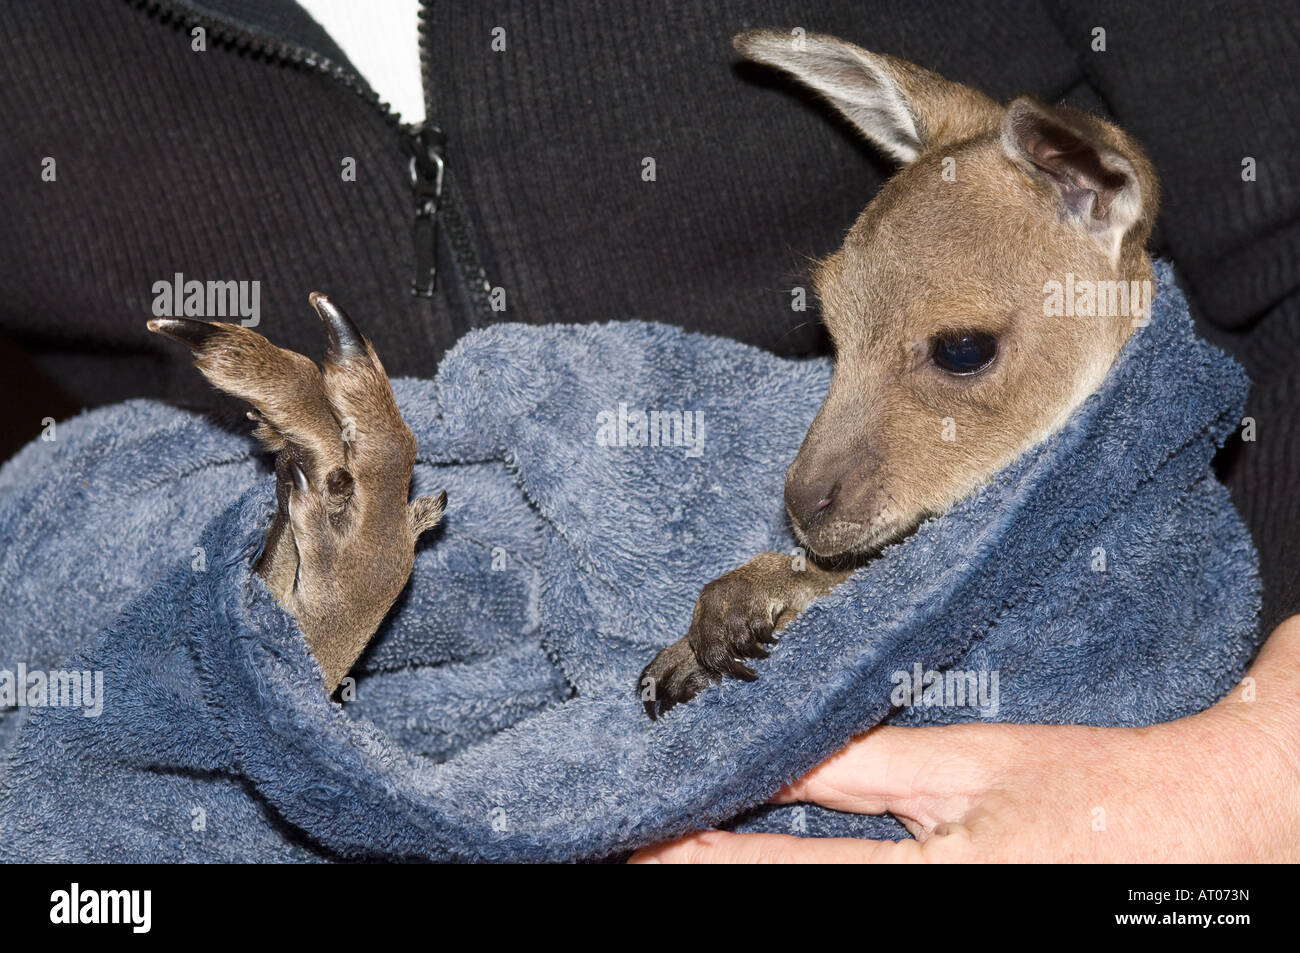 Western Grey Kangaroo (Macropus fuliginosus) 3 months old joey cared for after mother was killed on Australian road Stock Photo